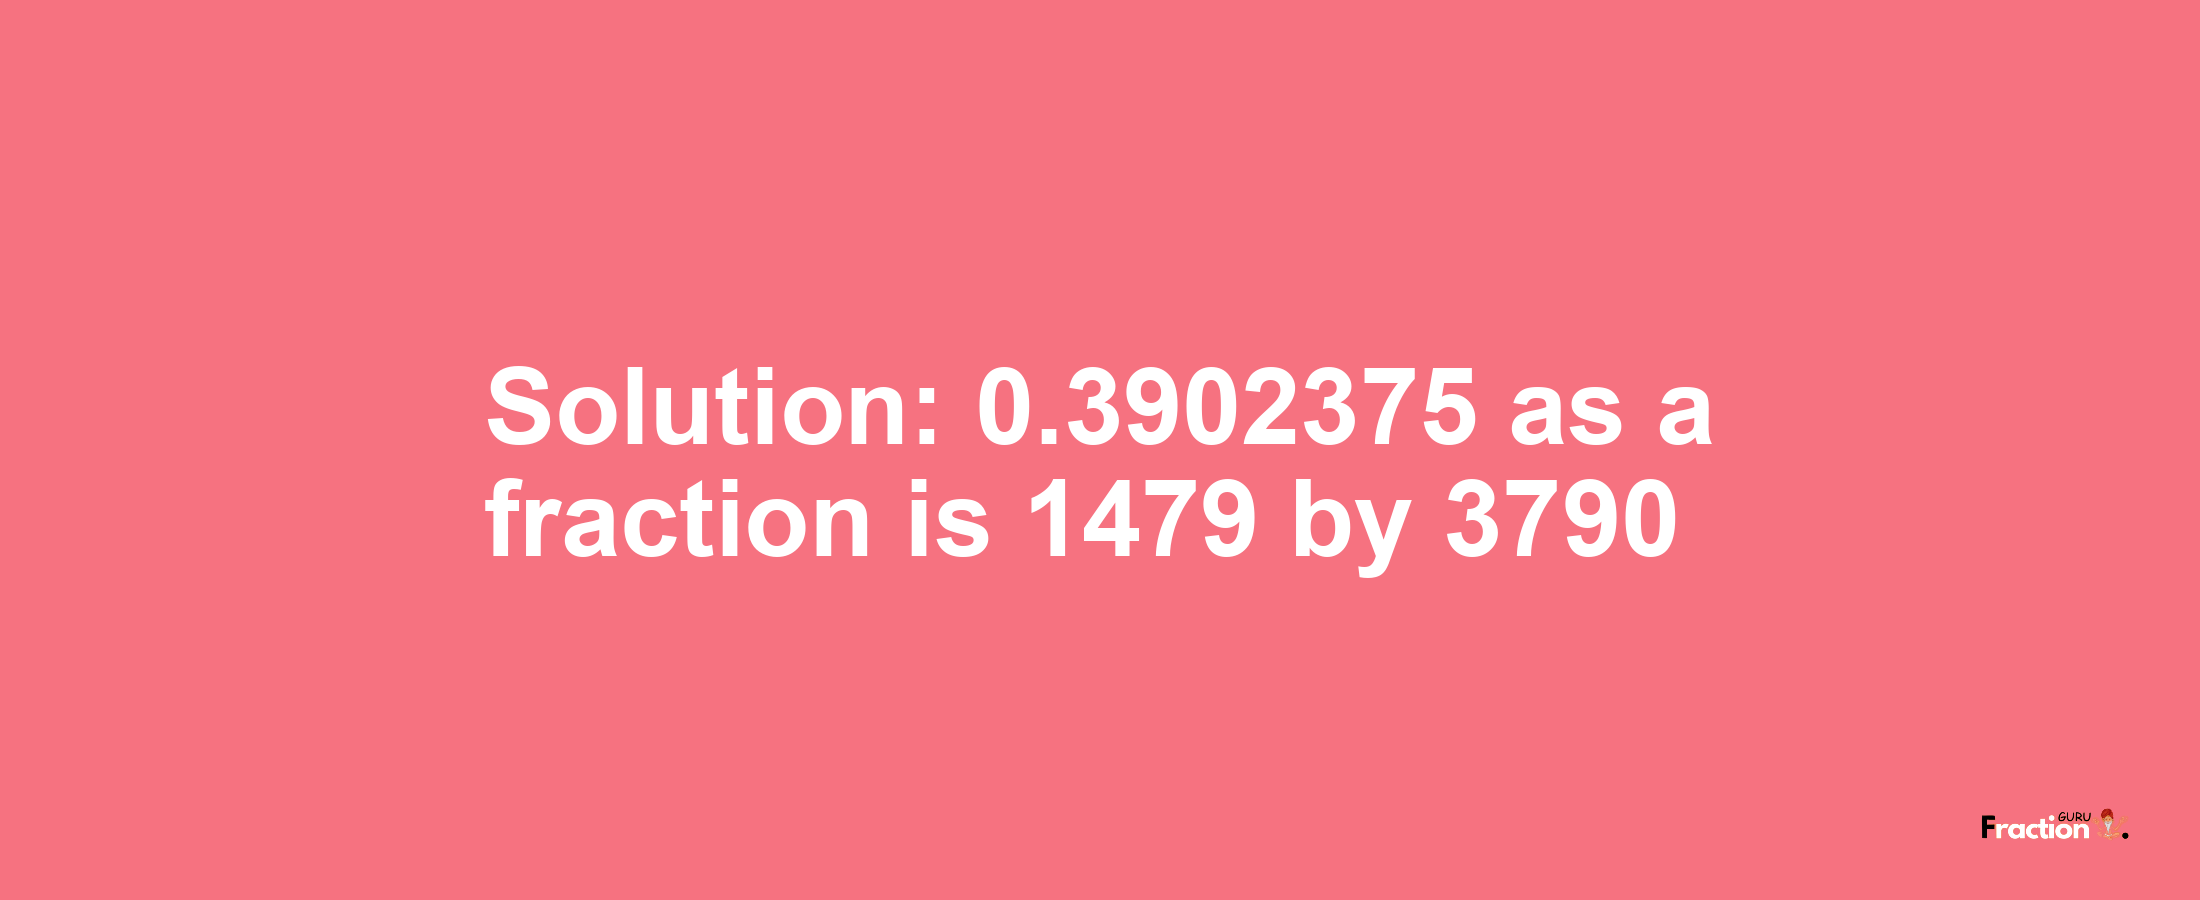 Solution:0.3902375 as a fraction is 1479/3790